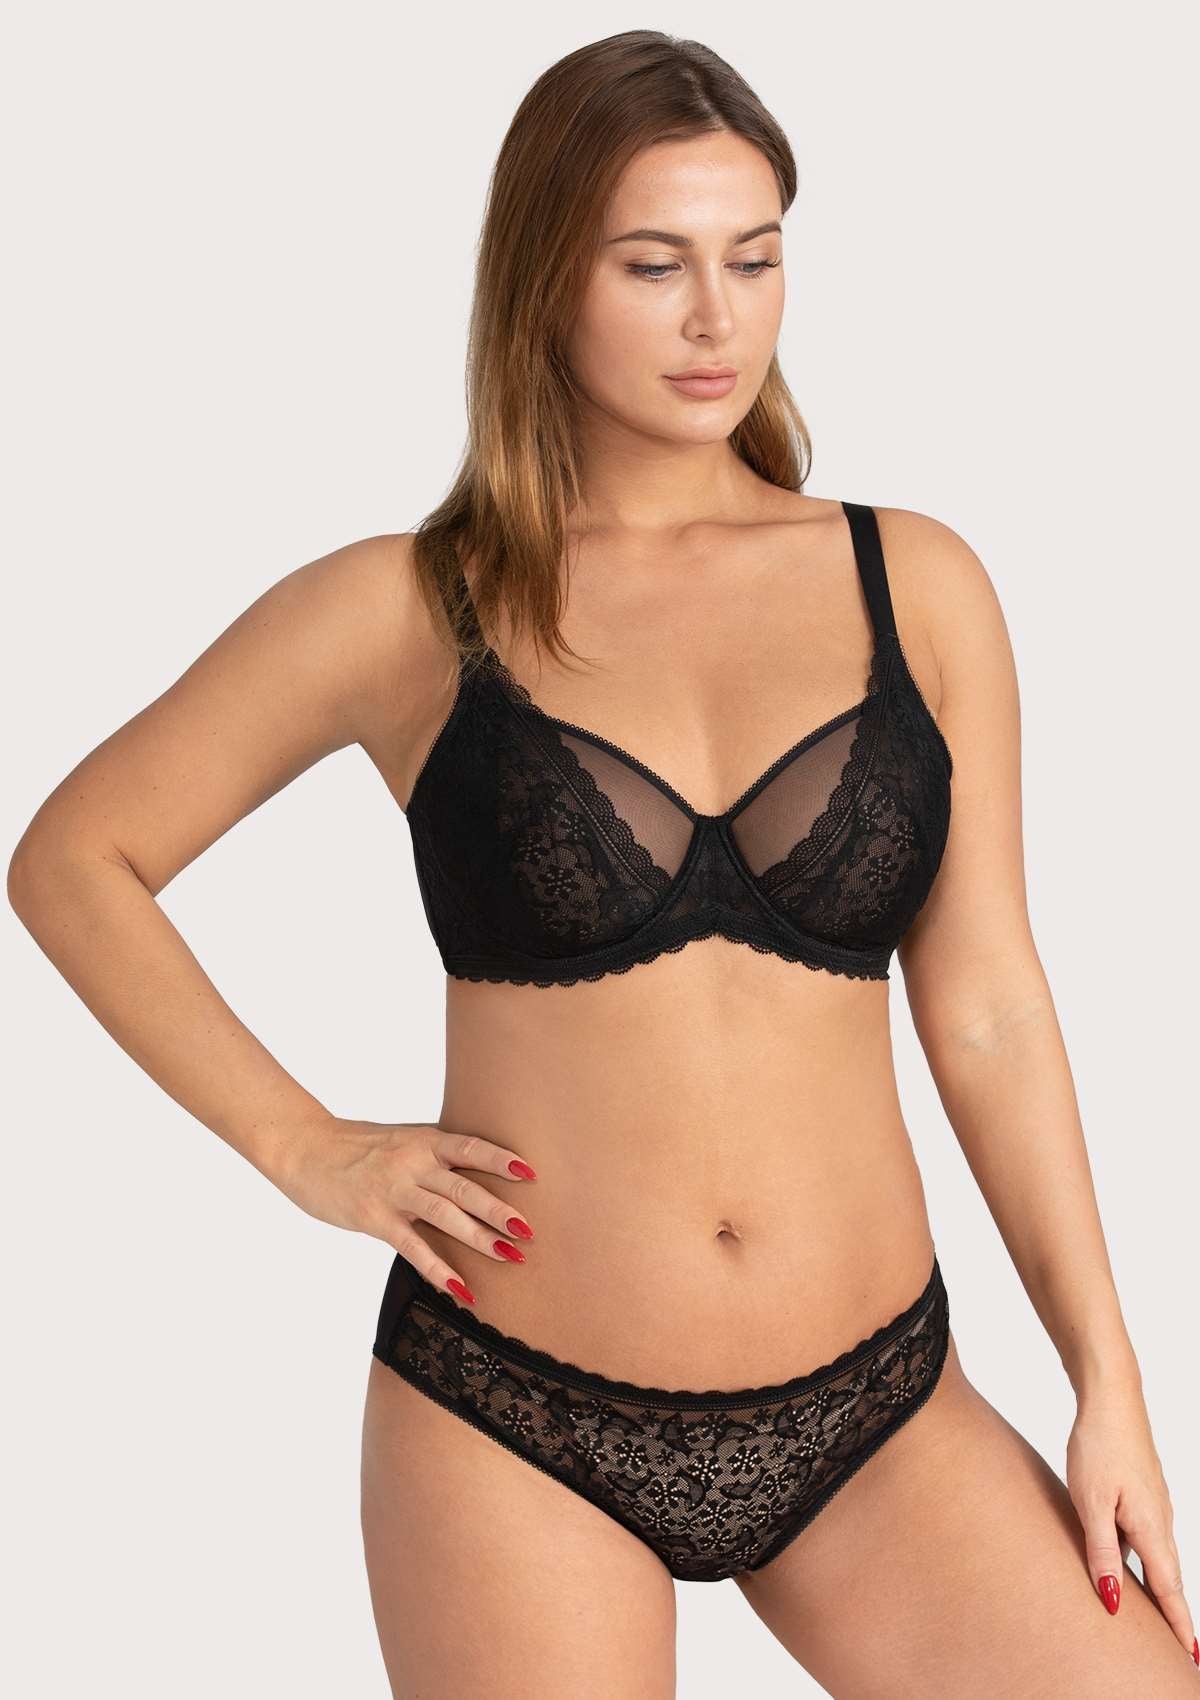 HSIA Anemone Lace Bra And Panties: Back Support Wired Bra - Black / 34 / D